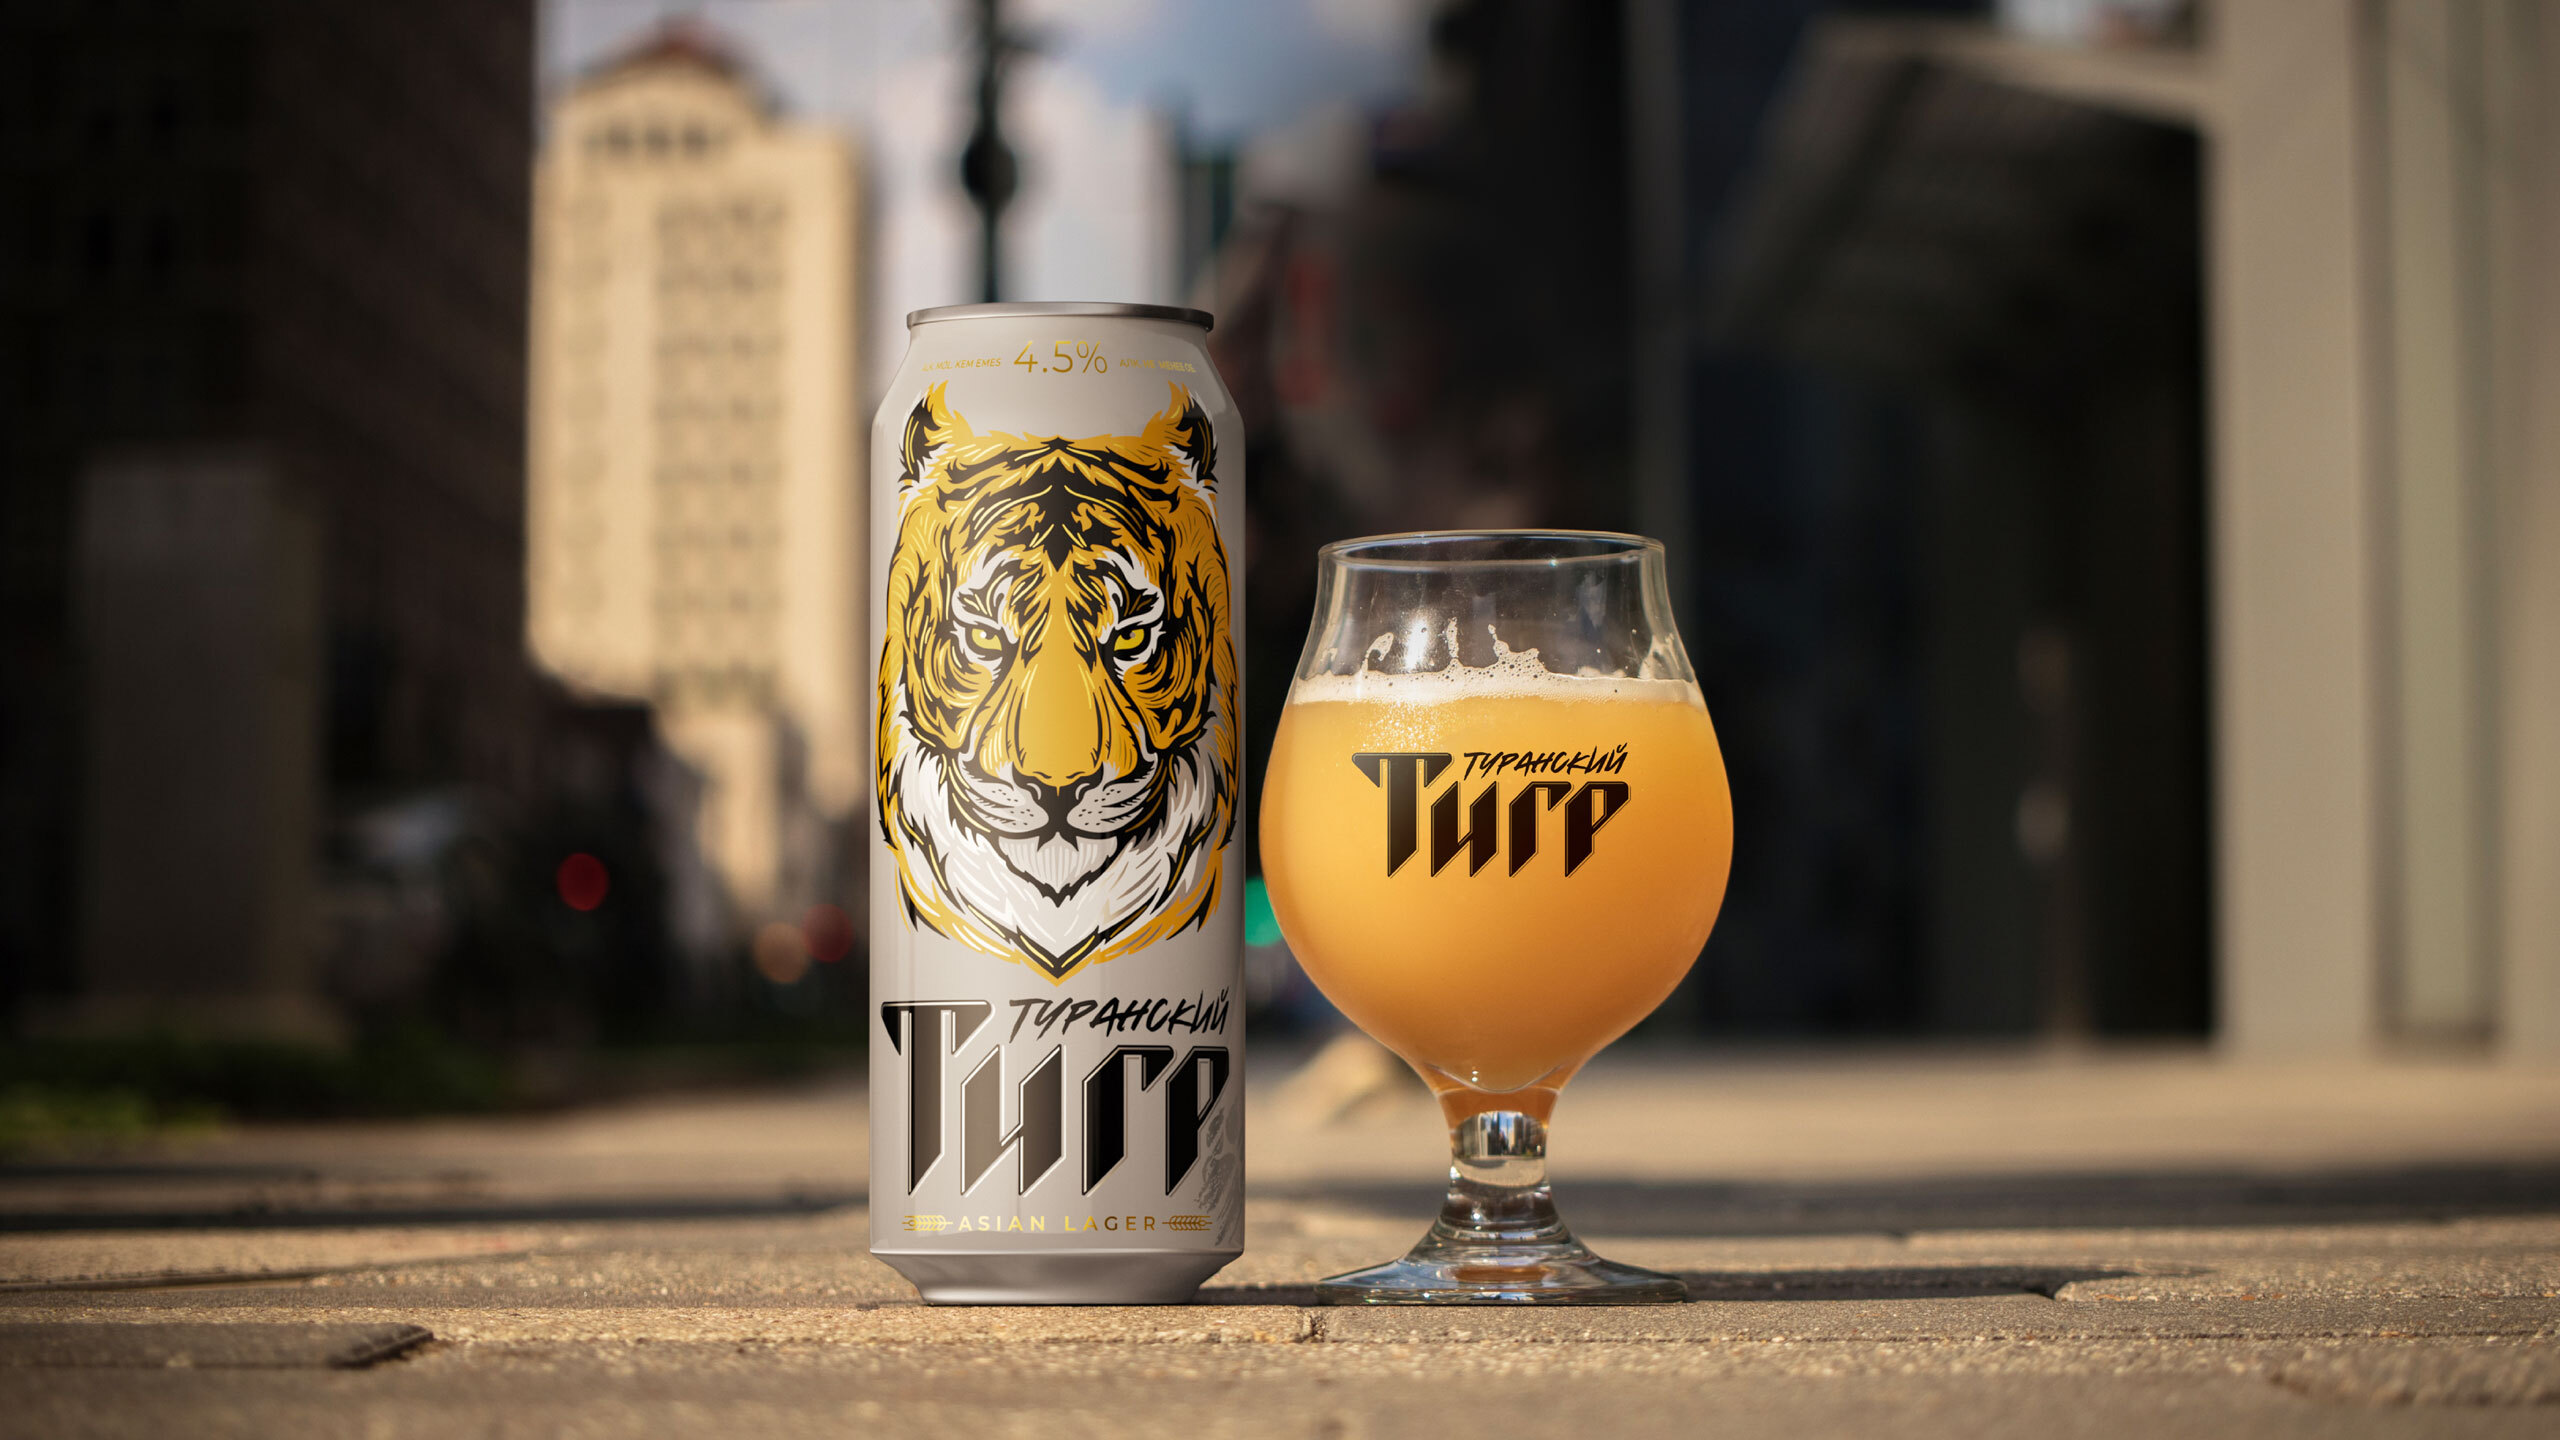 Dozen Agency Creates Beer Packaging Design for Asian Lager Turanian Tiger from Almaty Brewery